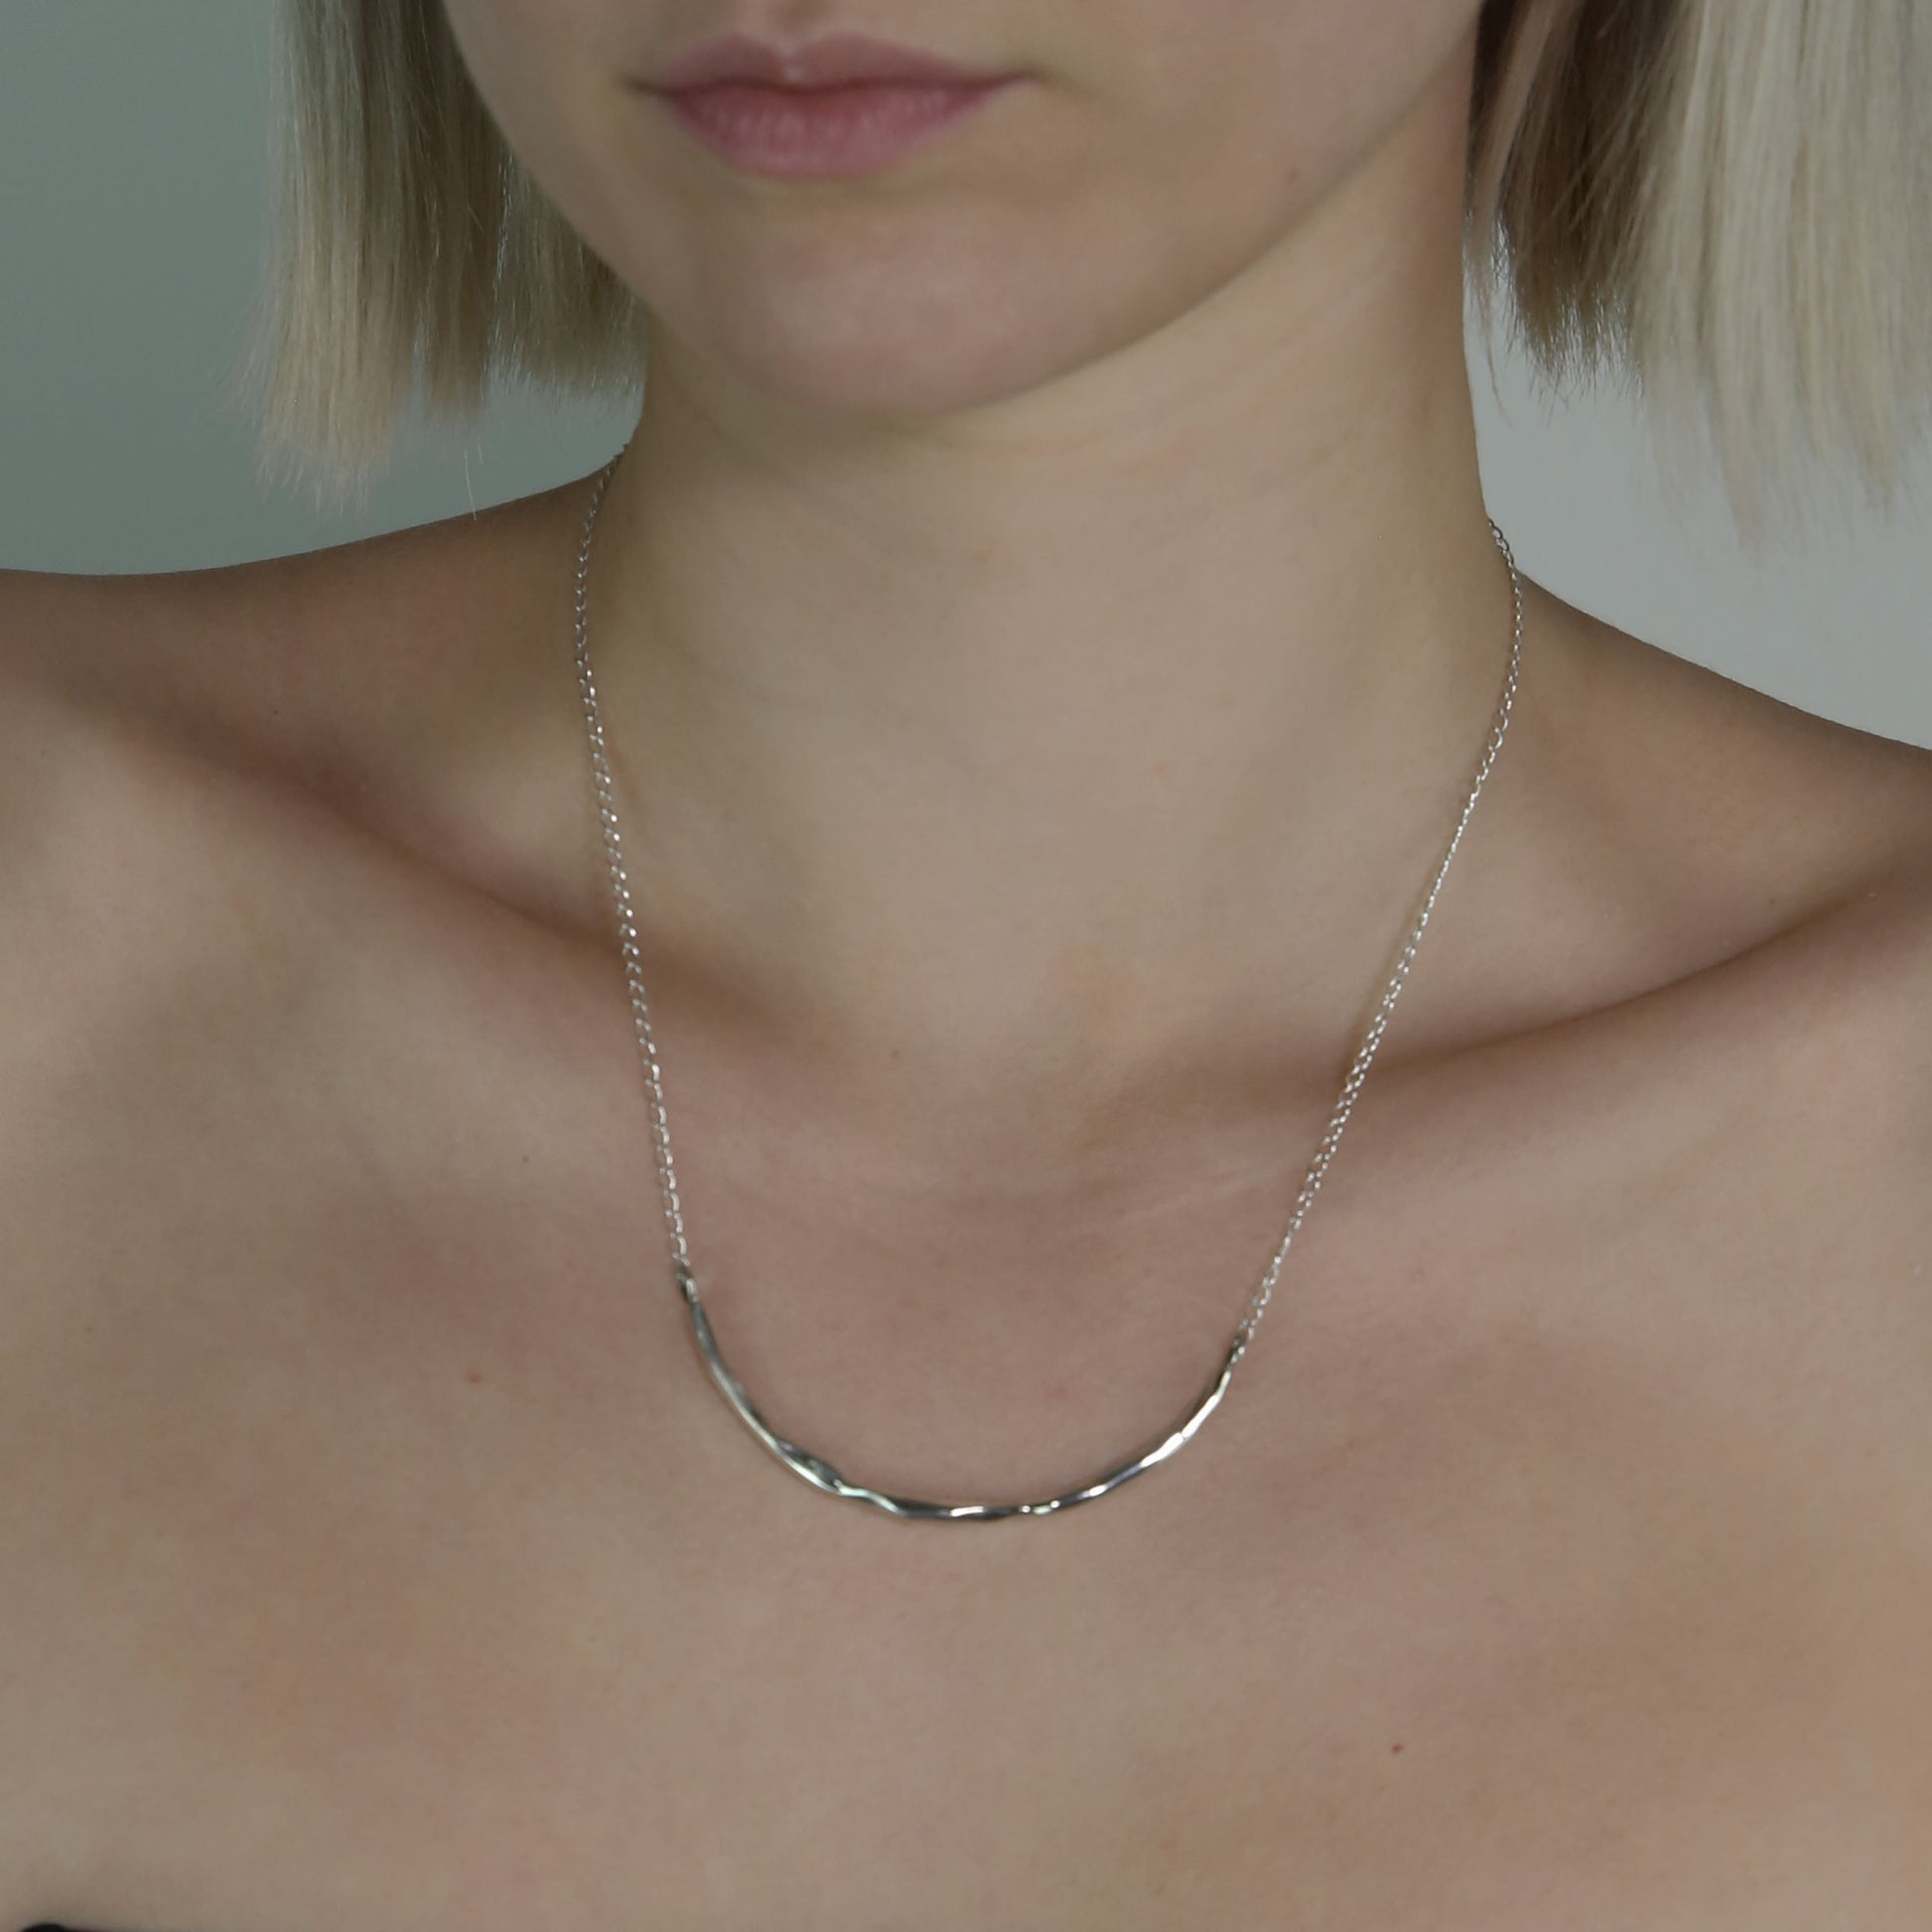 The Briliante necklace is a handmade piece crafted from sterling silver 925. It features a minimal silver strip with a textured appearance, providing a glossy finish while gracefully embracing the neck. 